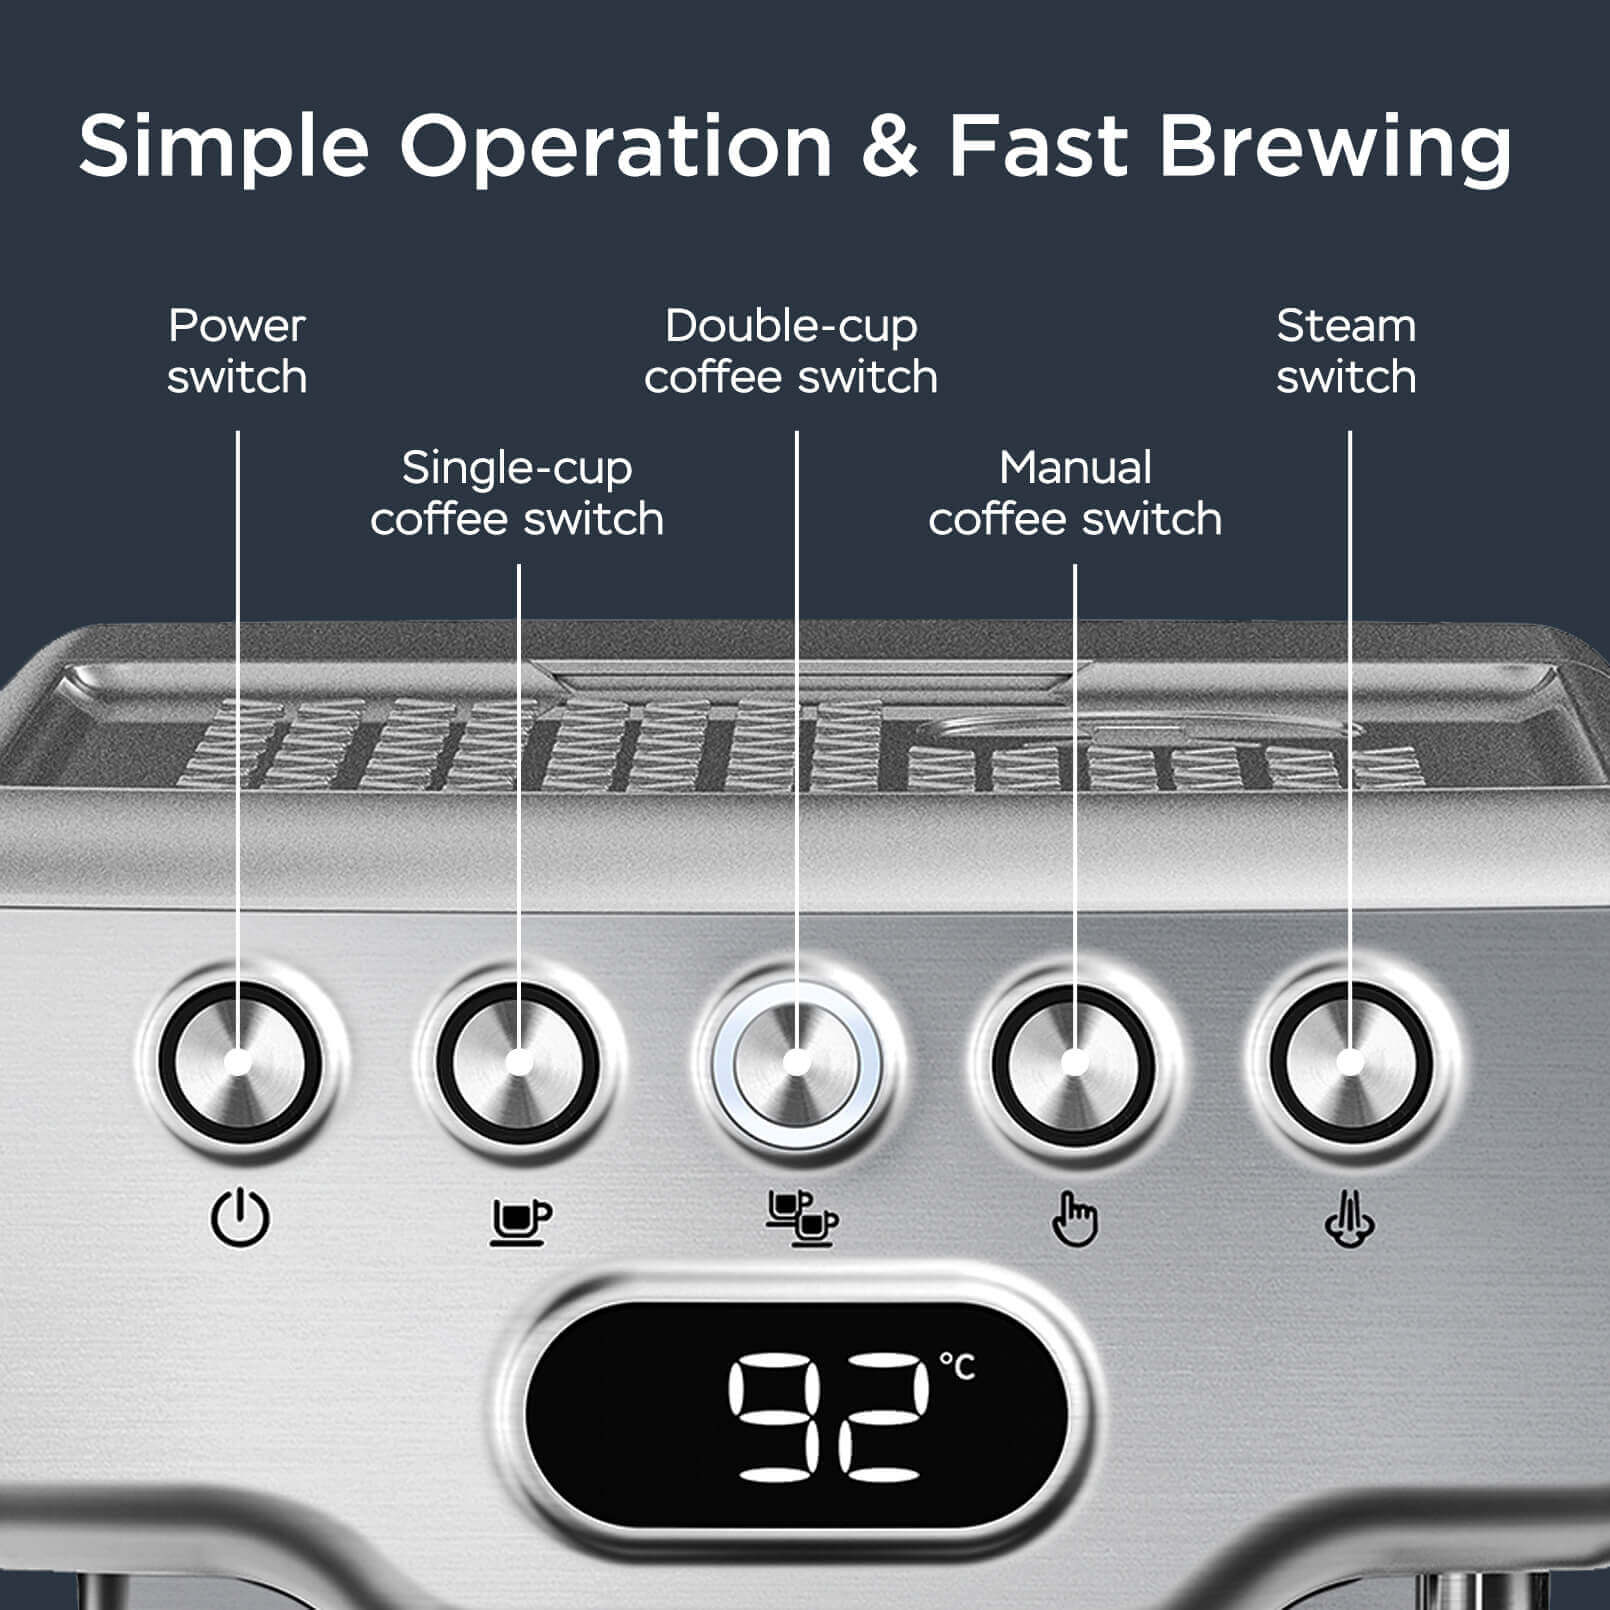 Espresso Machine / 20 Bar Coffee Machine with Milk Frother Steam Wand / Latte & Cappuccino Home Maker with ESE Filters, Stainless Steel